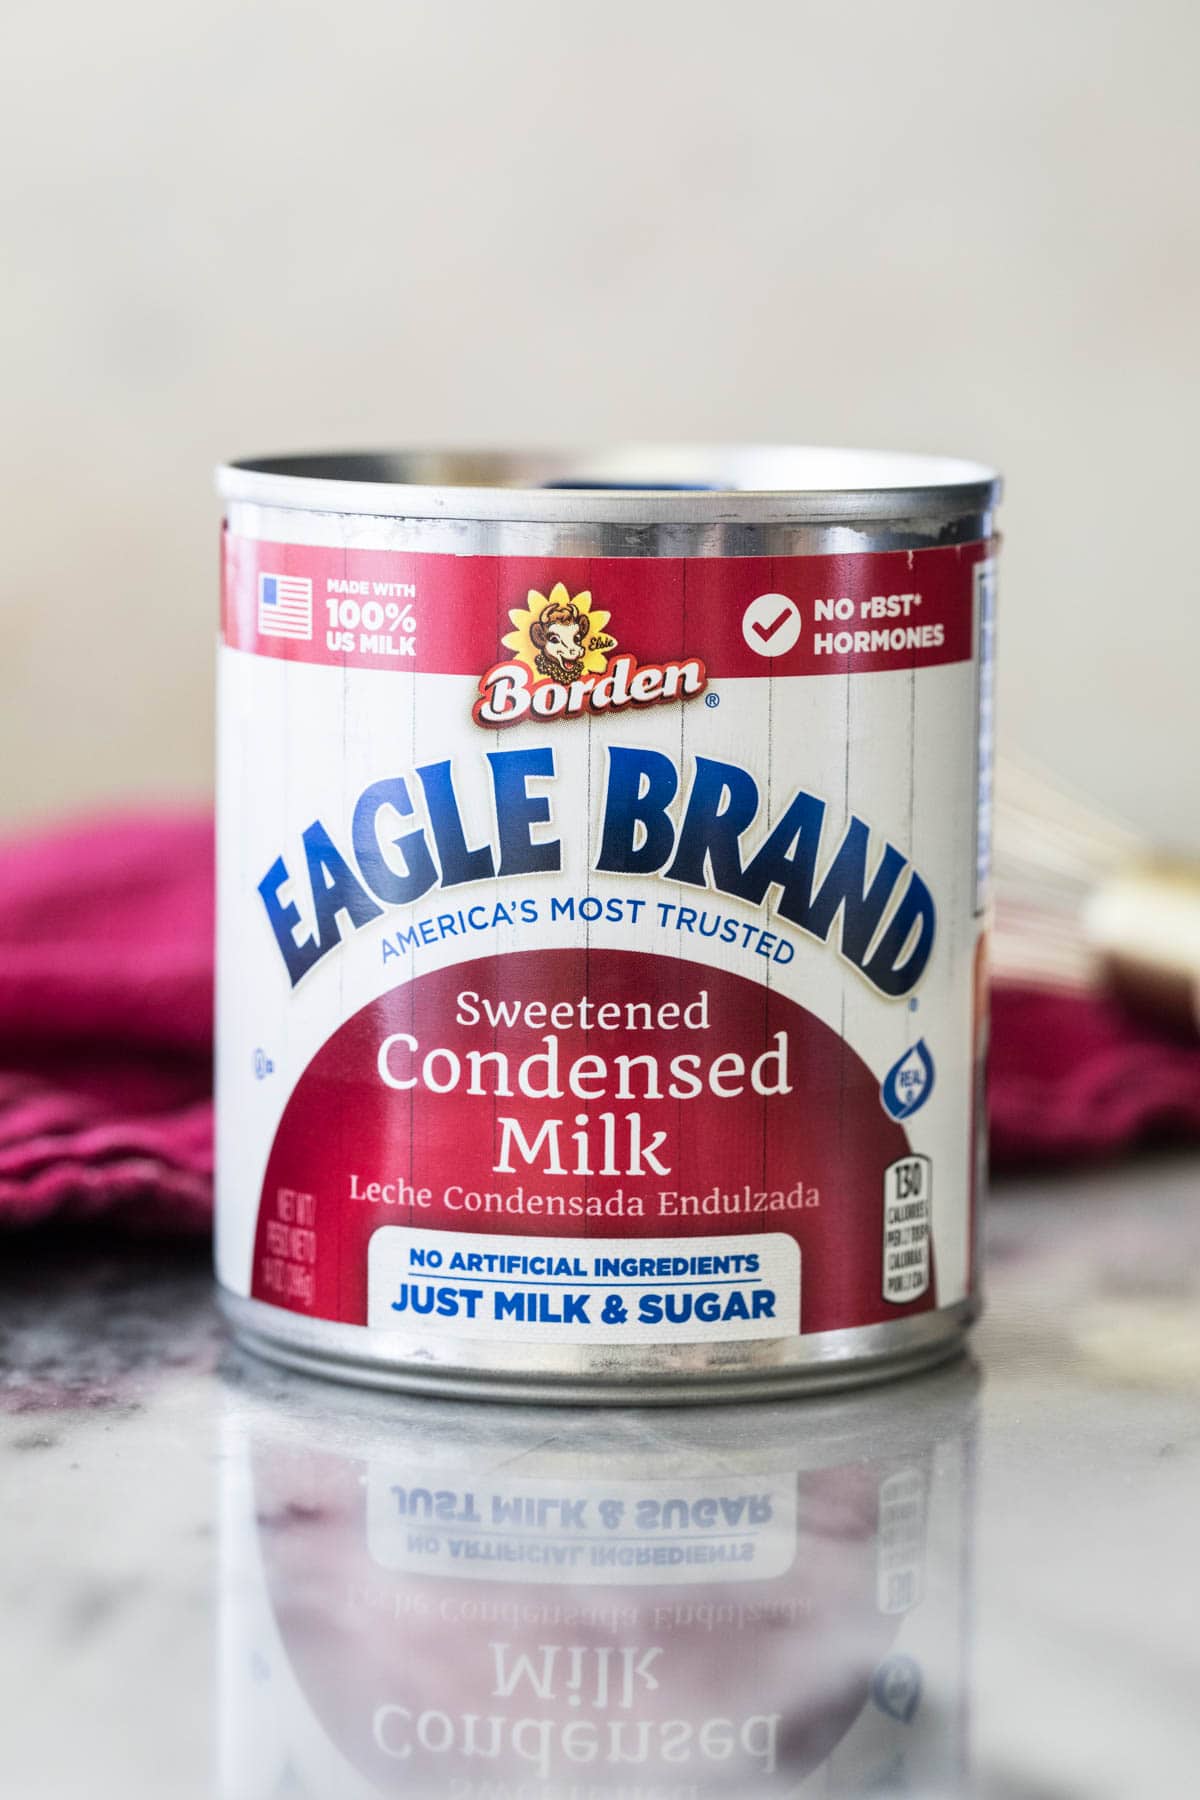 Can of Eagle brand condensed milk